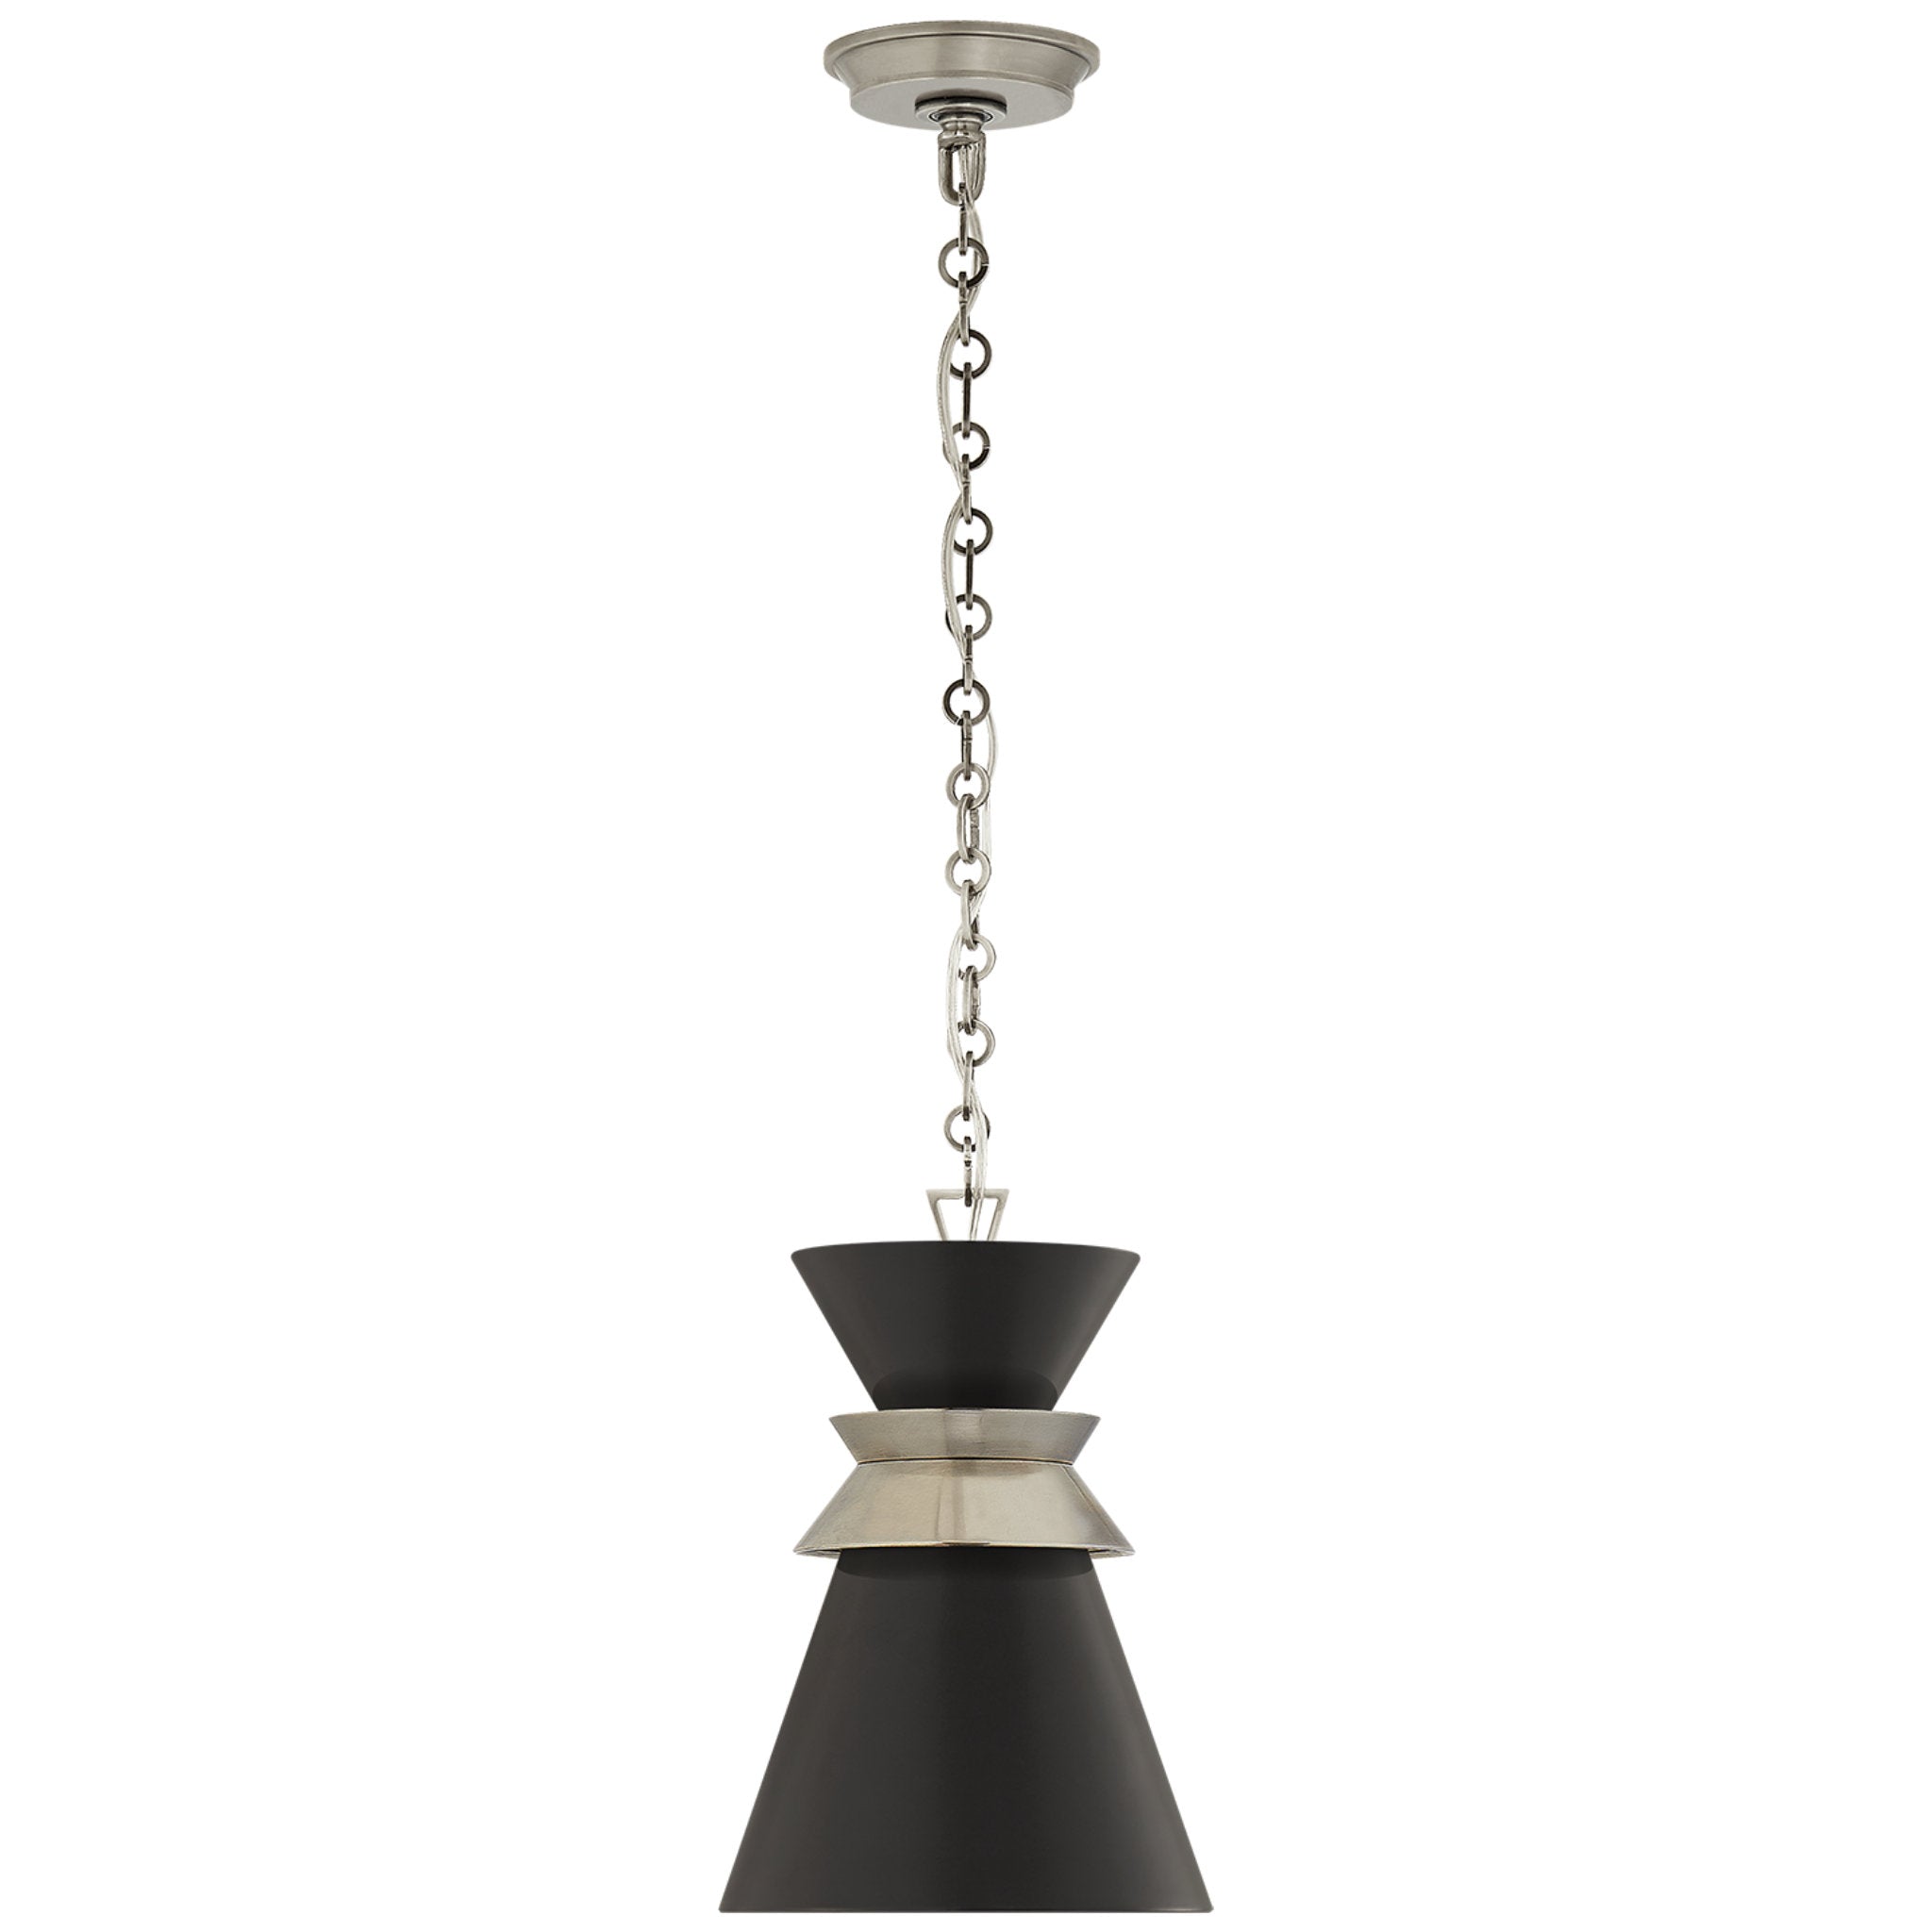 Chapman & Myers Alborg Small Stacked Pendant in Antique Nickel with Matte Black Shade